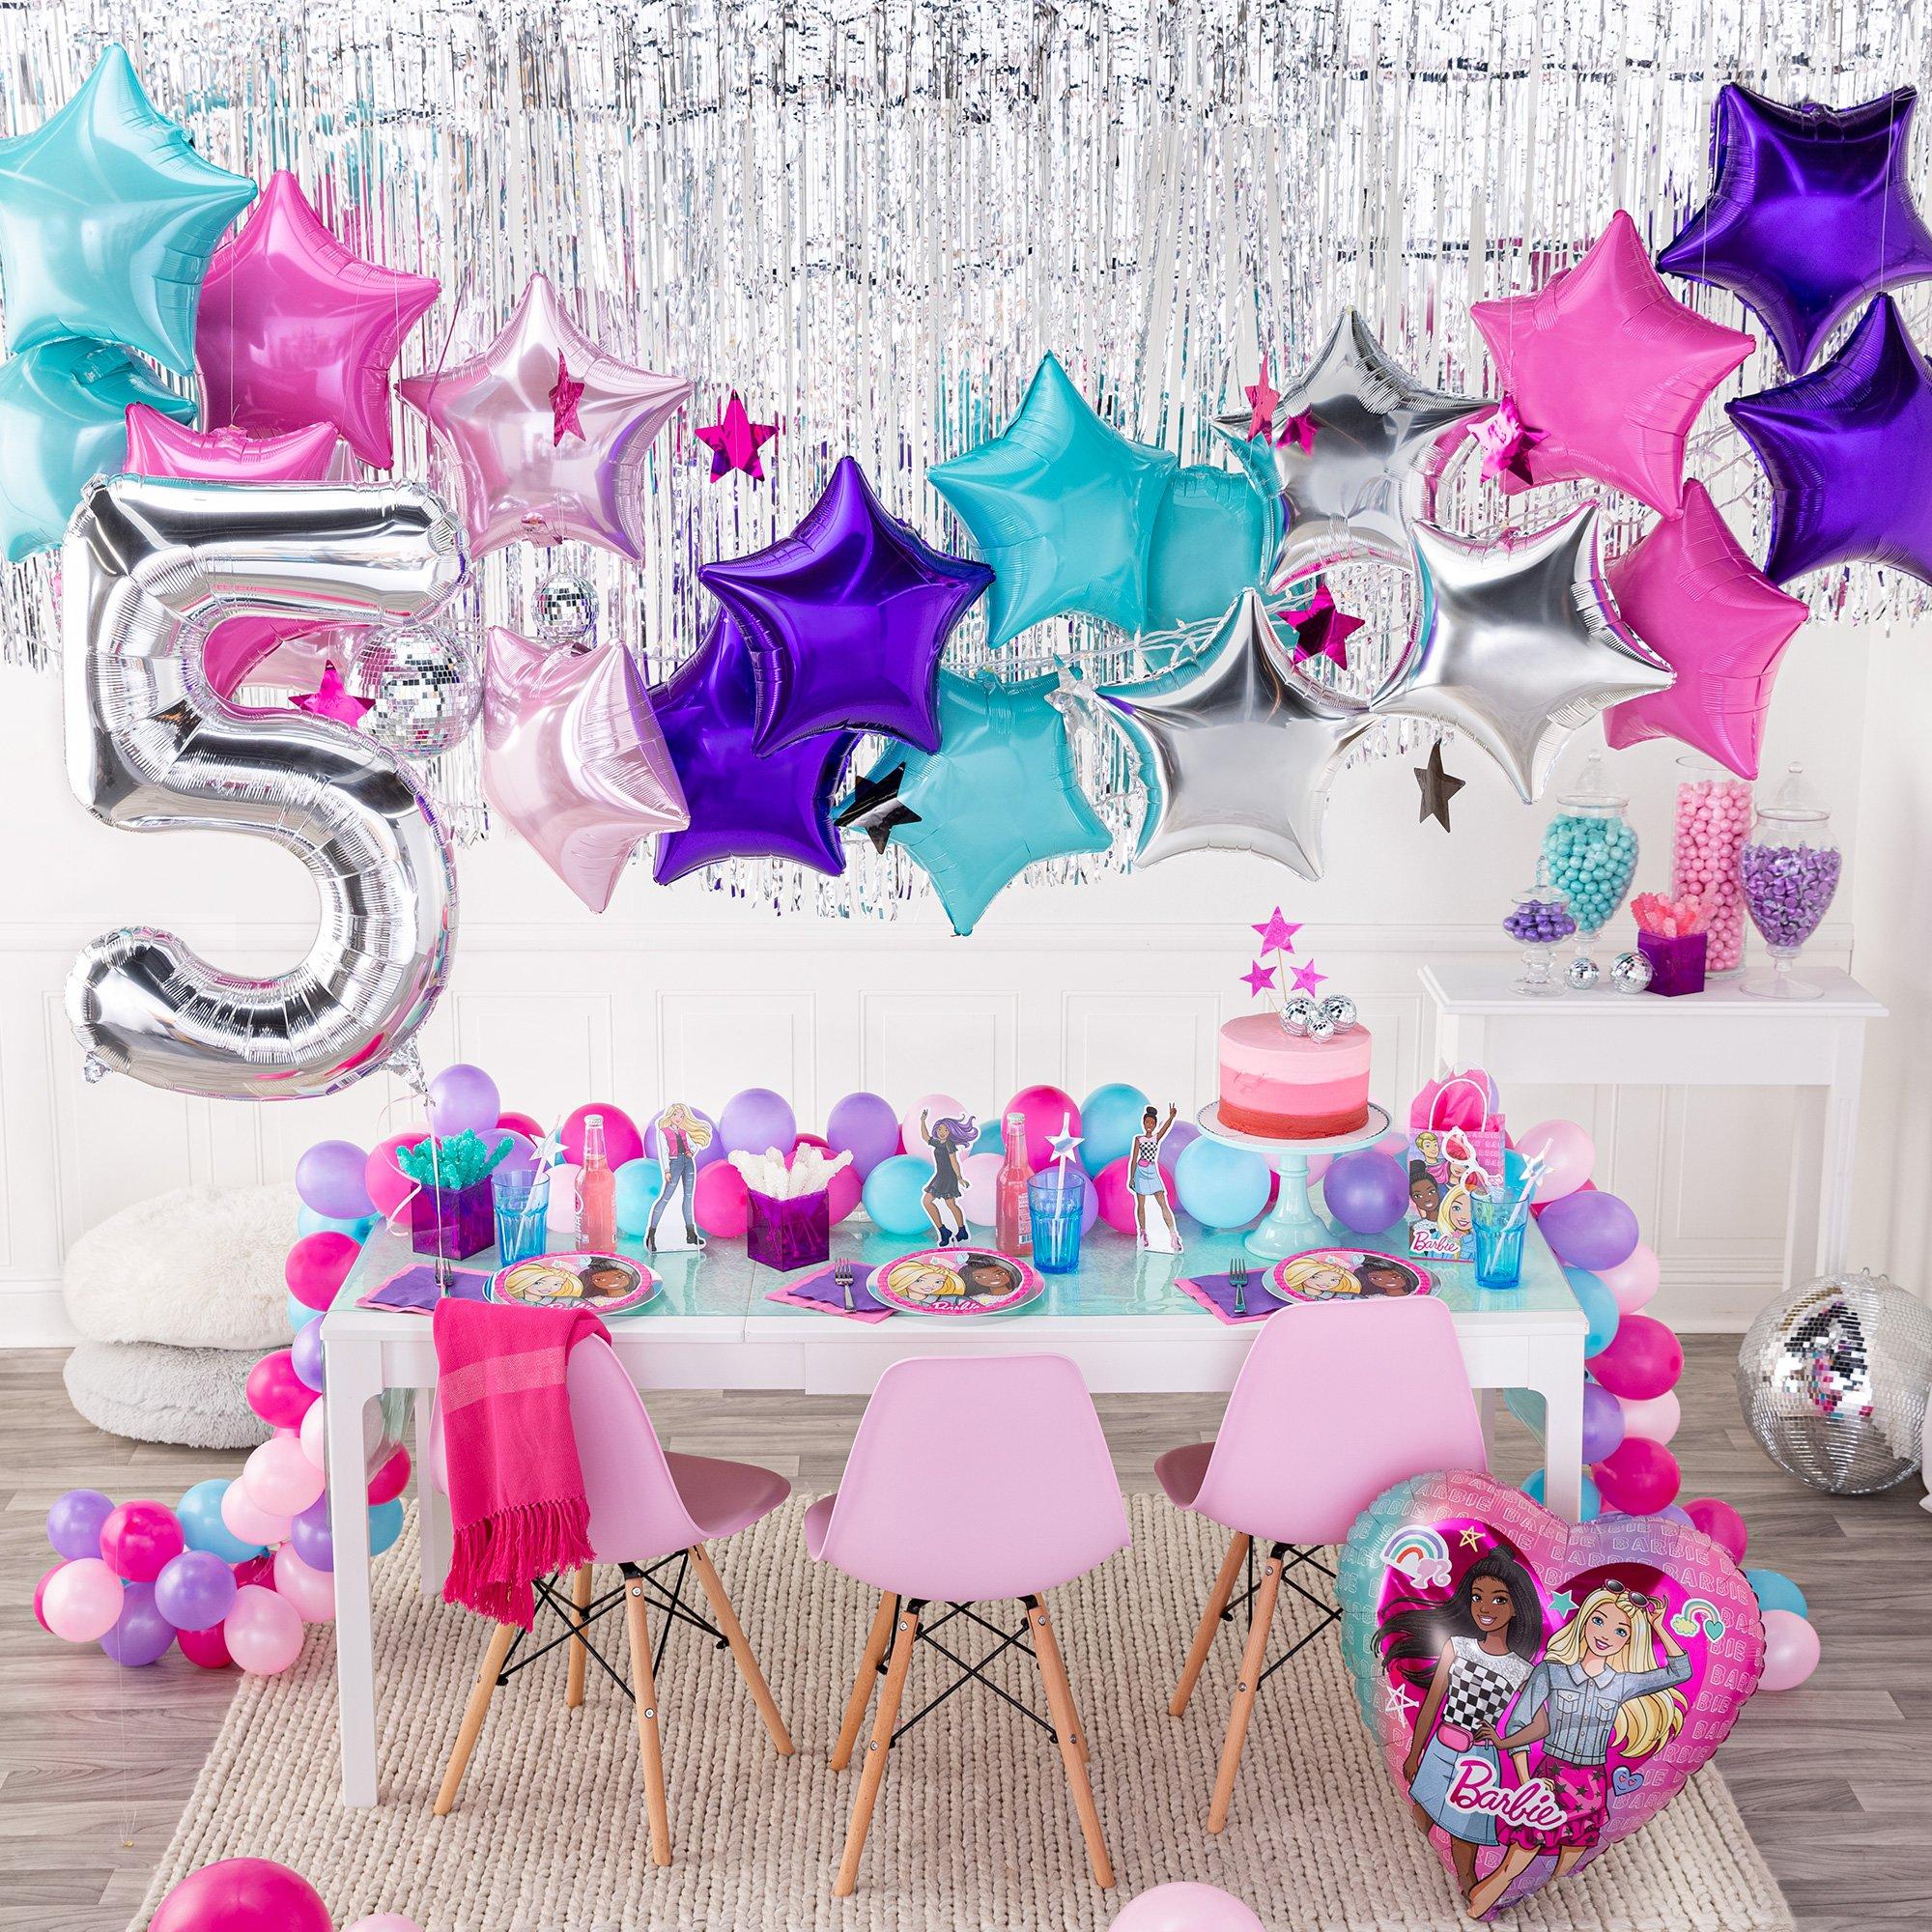 Shop the Collection: Barbie Dream Birthday Party